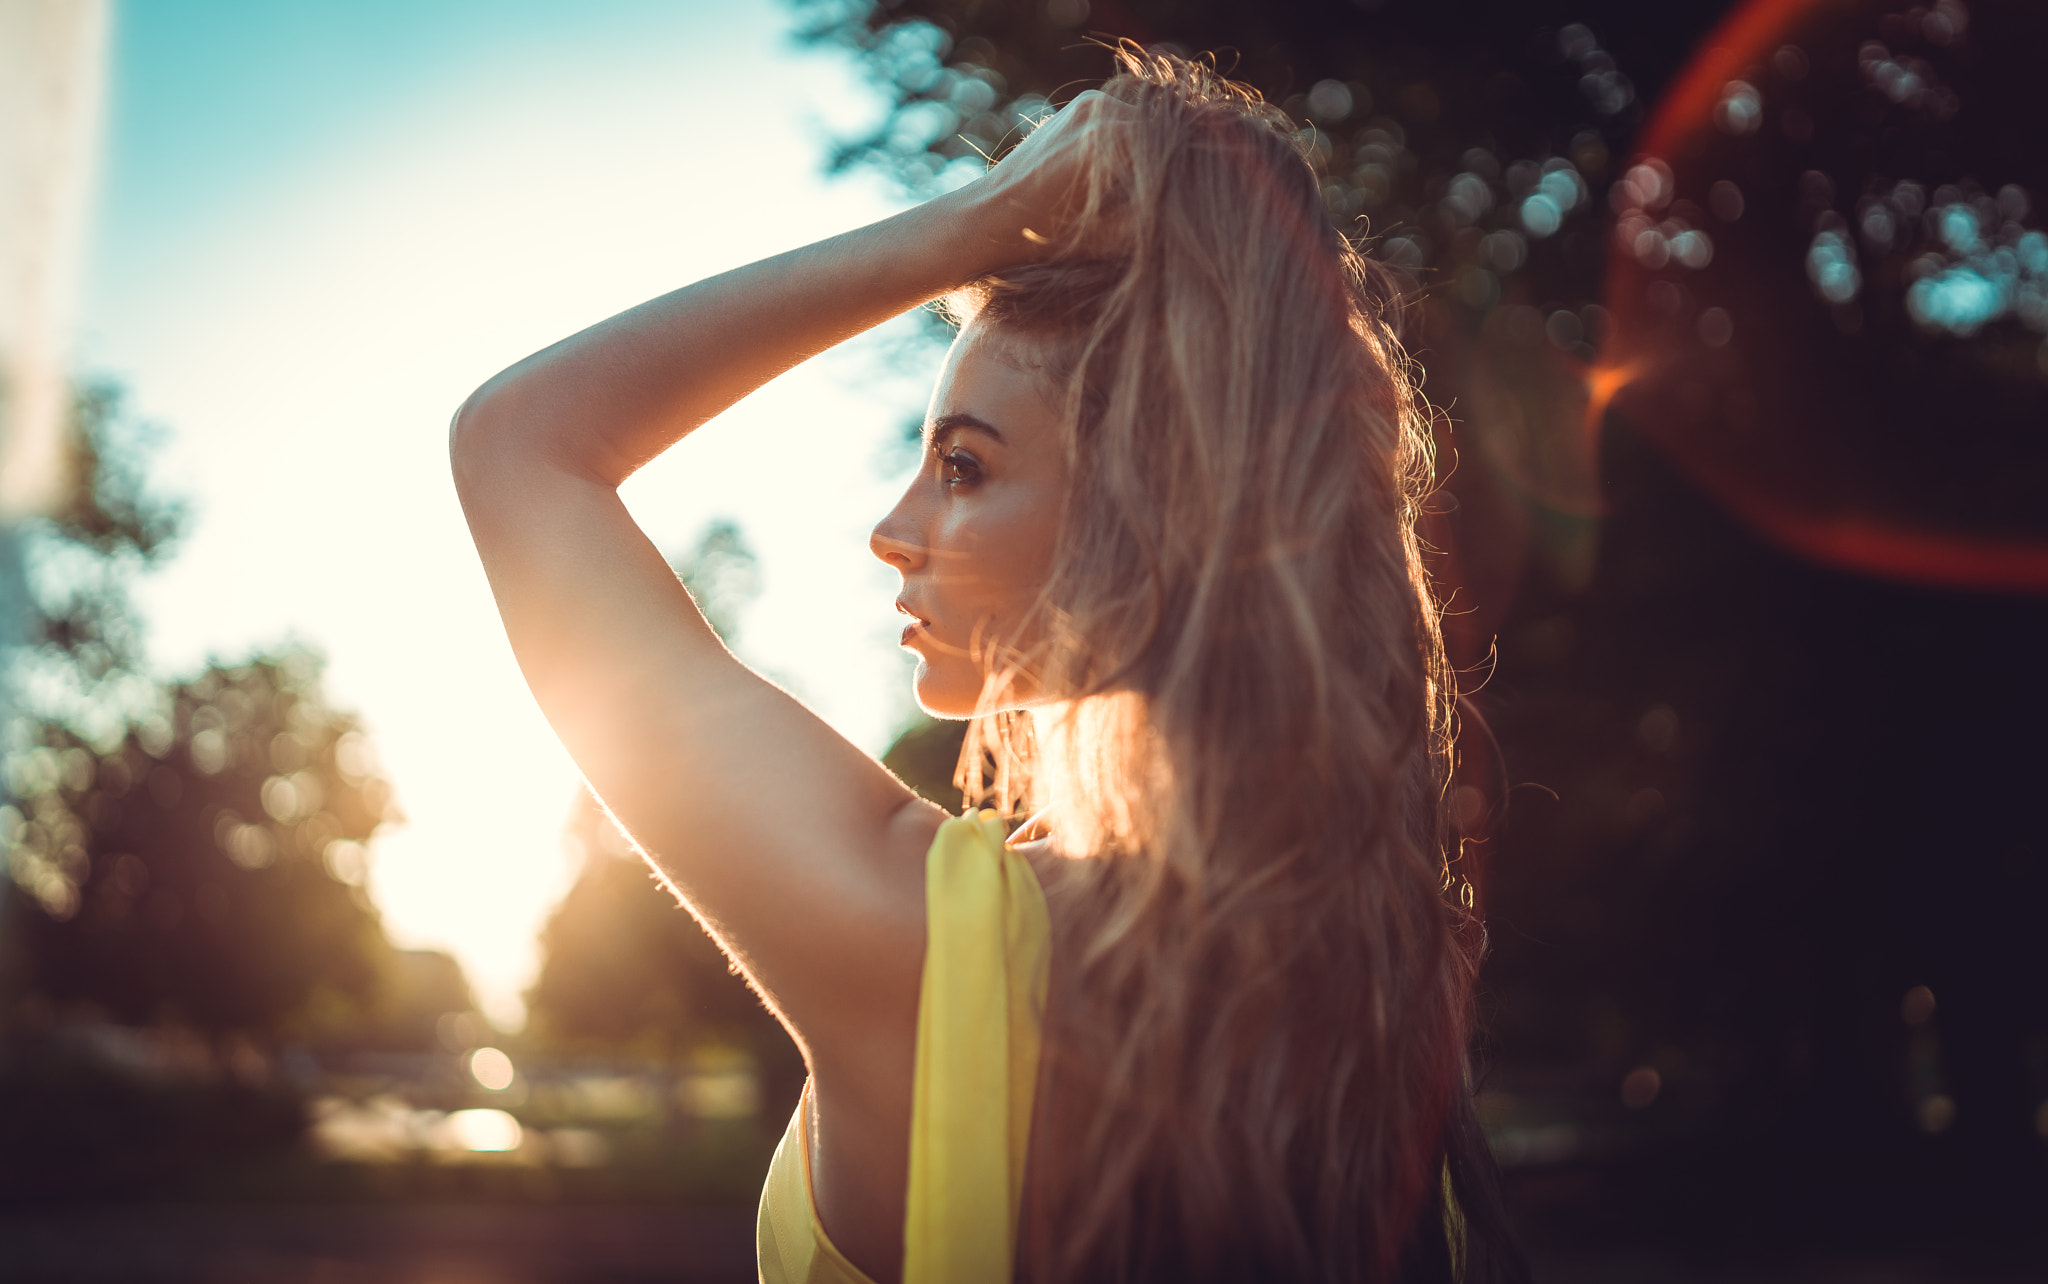 Women Blonde Face Long Hair Women Outdoors Dress Tanned Back Lens Flare Hands In Hair Looking Into T 2048x1284